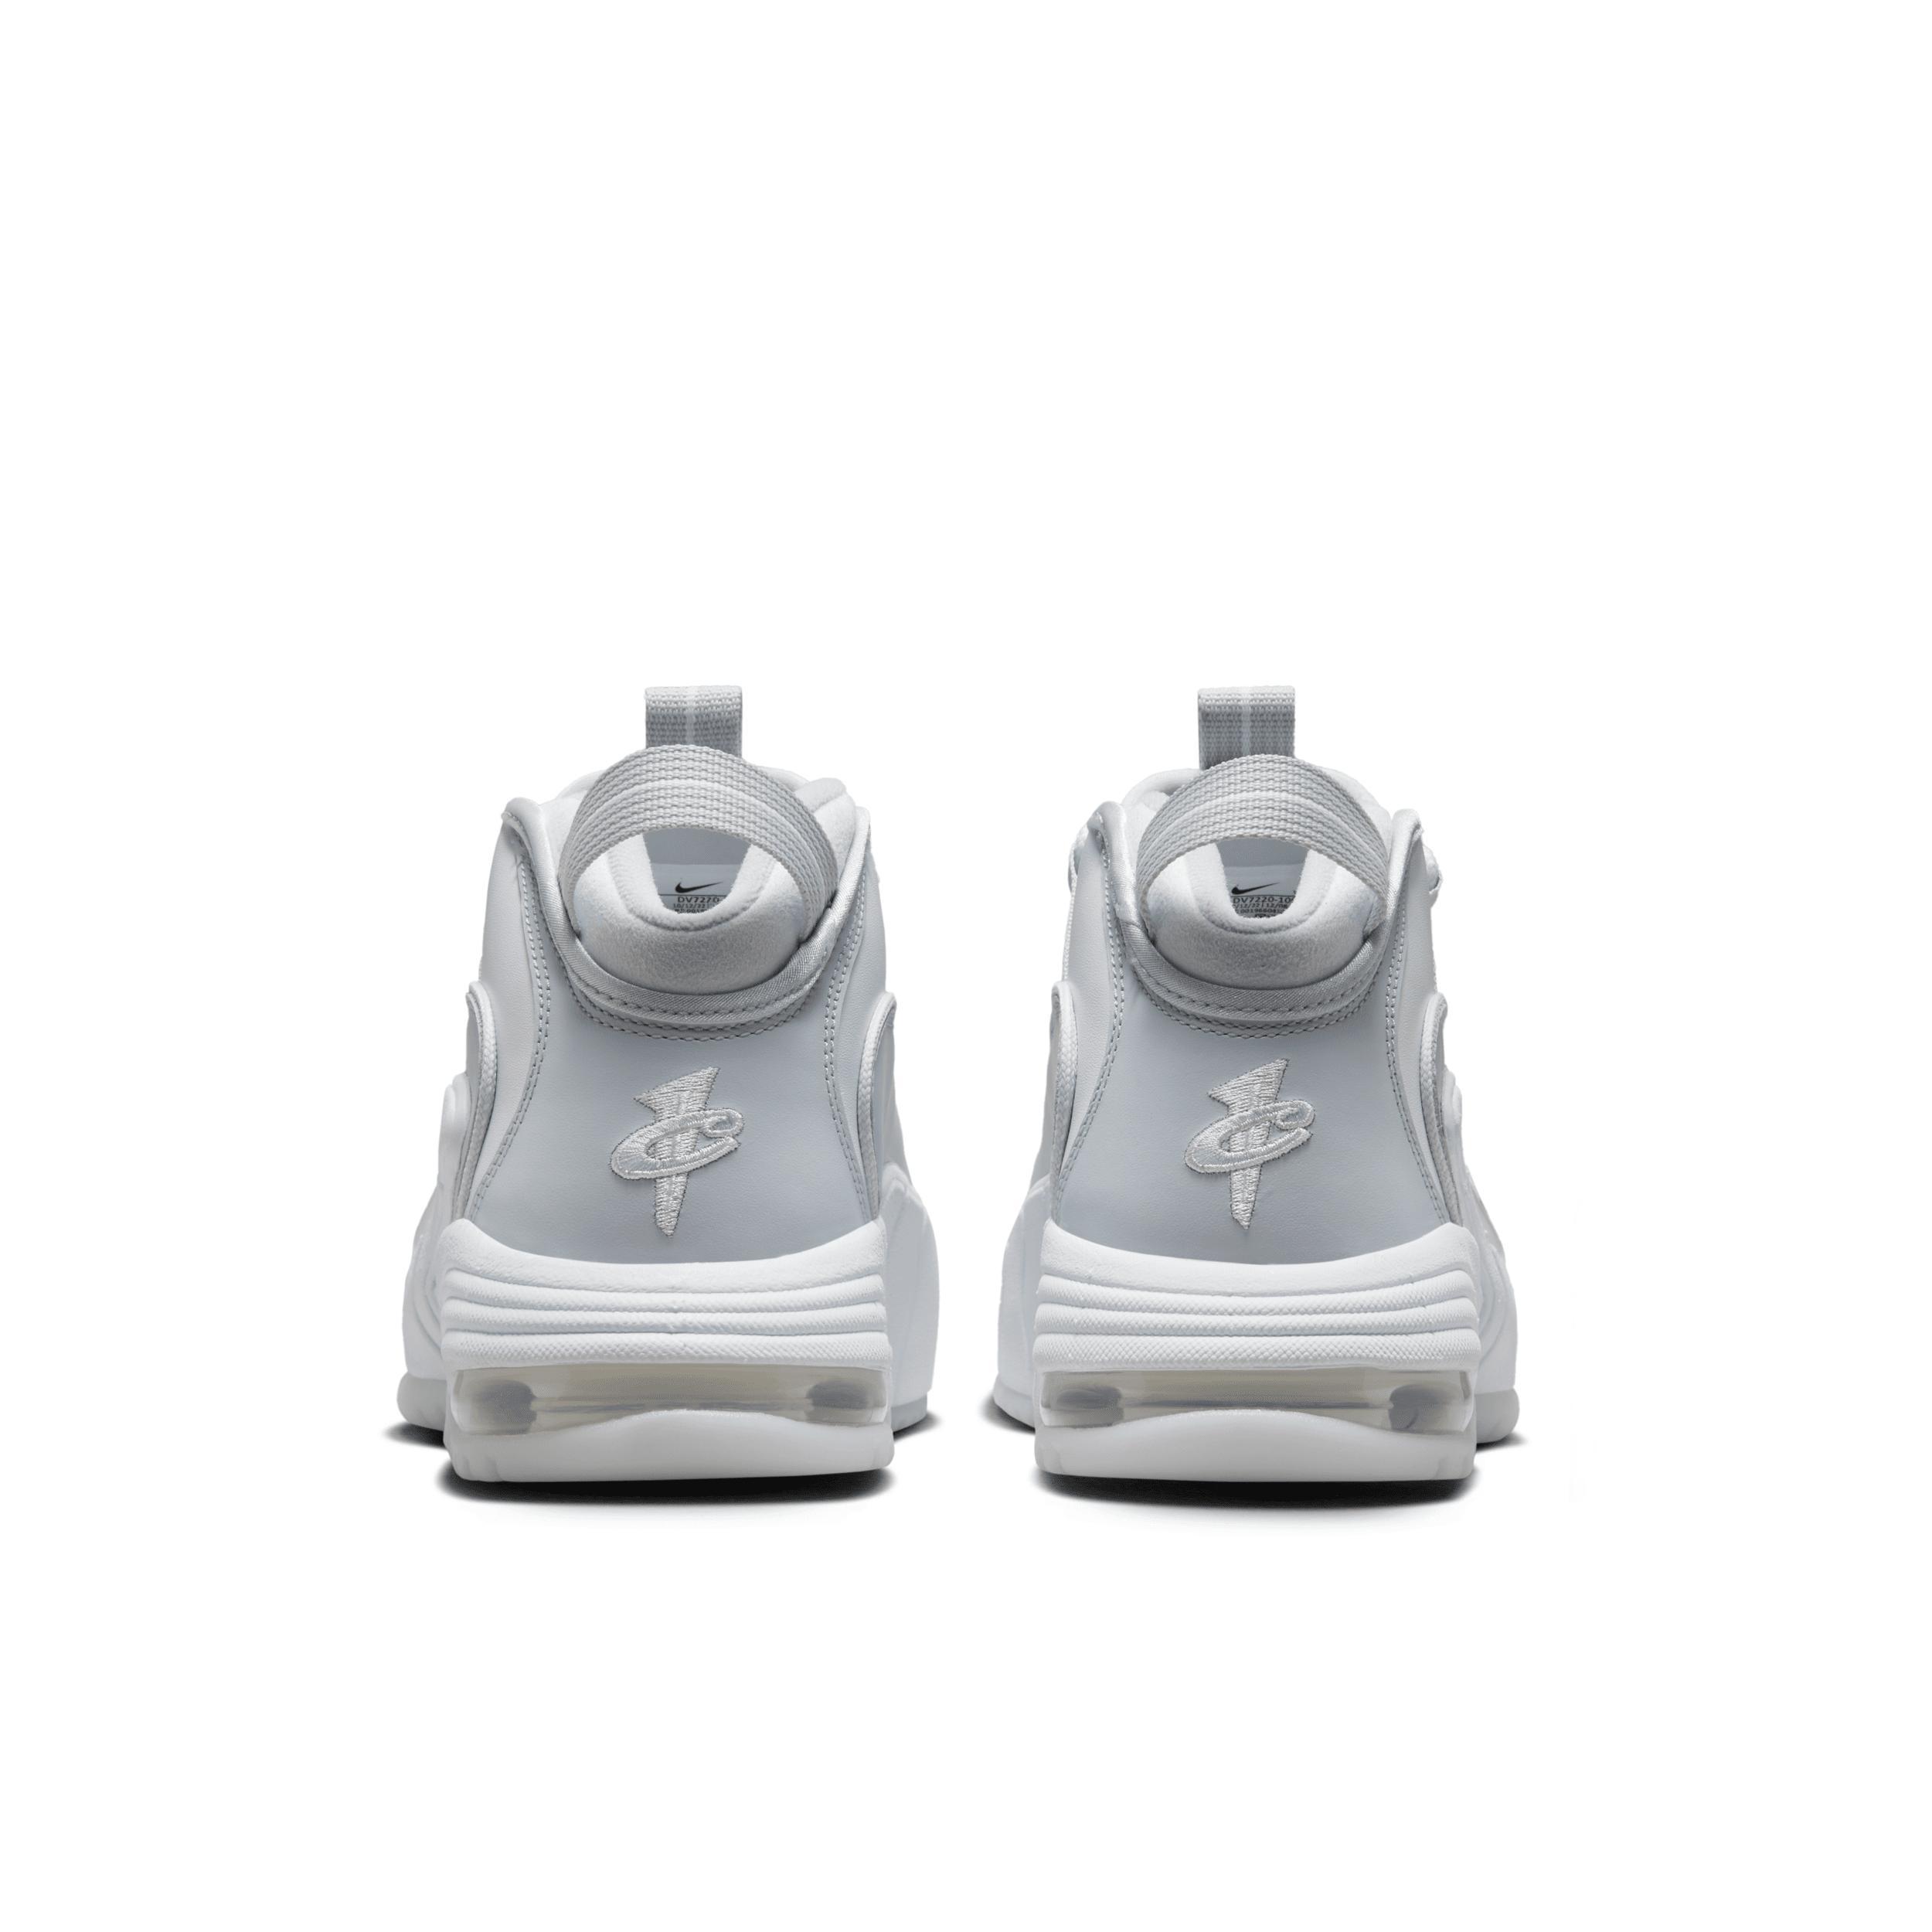 Nike Men's Air Max Penny Shoes Product Image